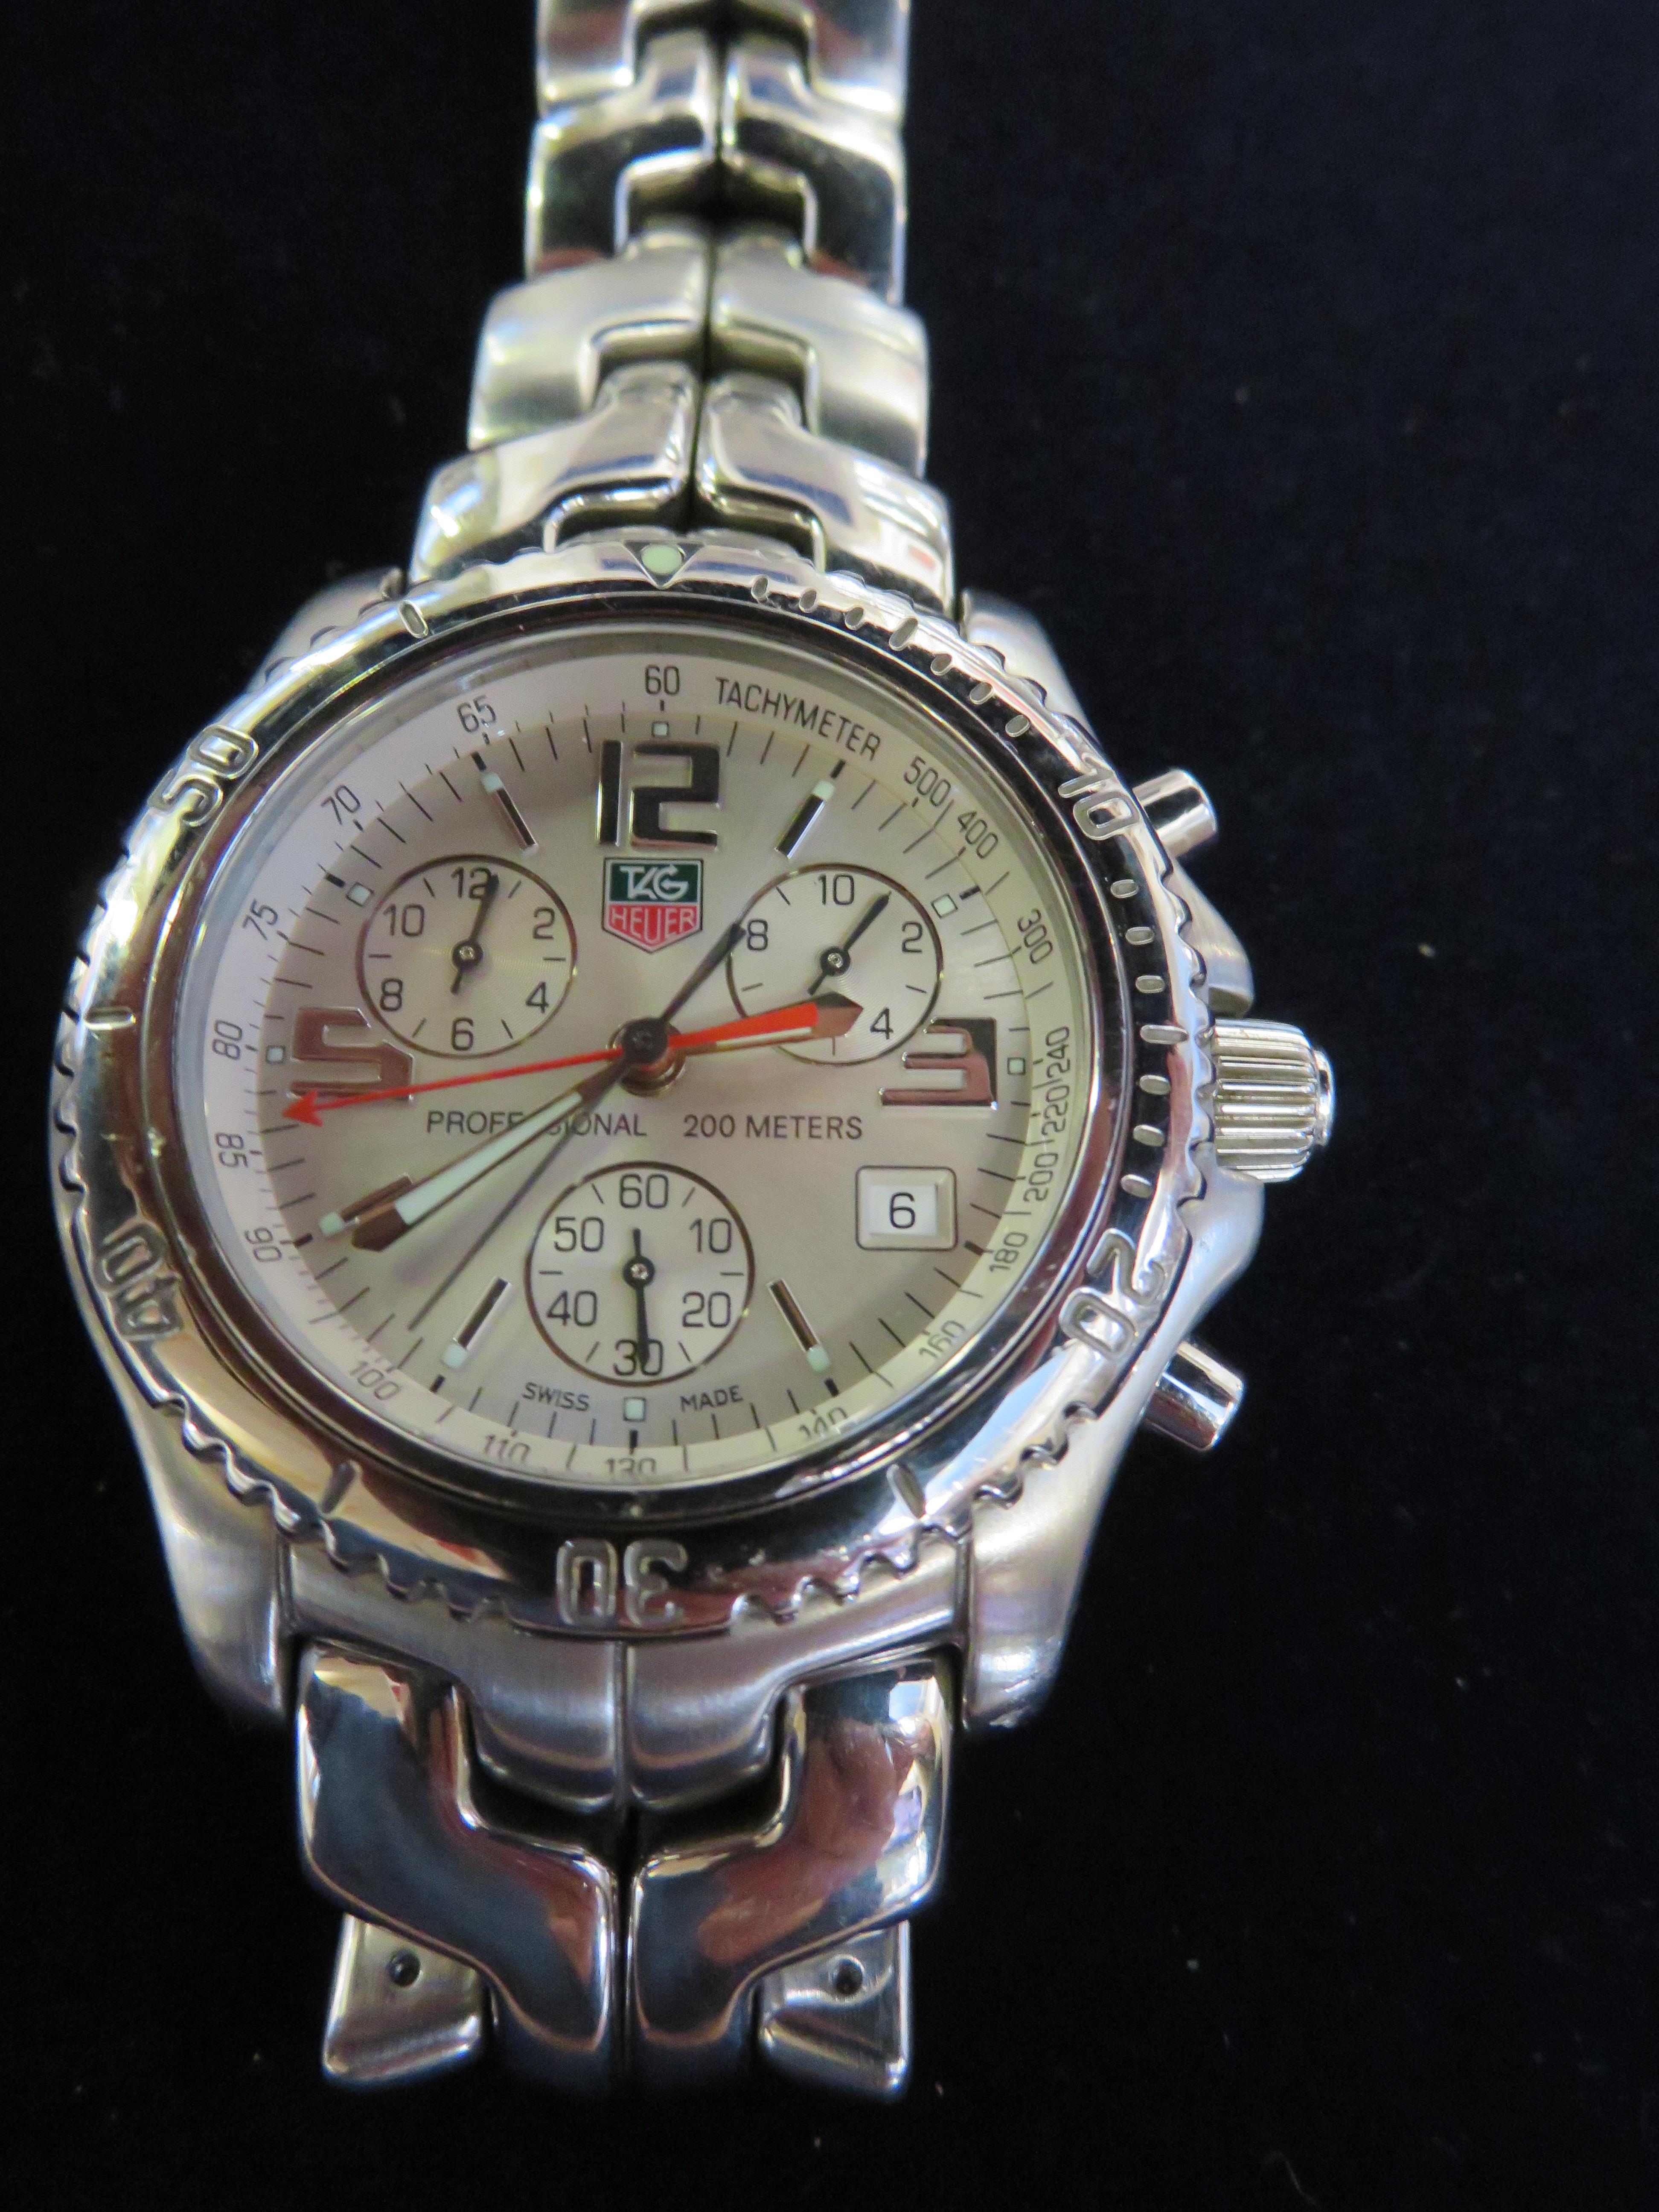 Gents Tag Heuer chronograph wristwatch, currently